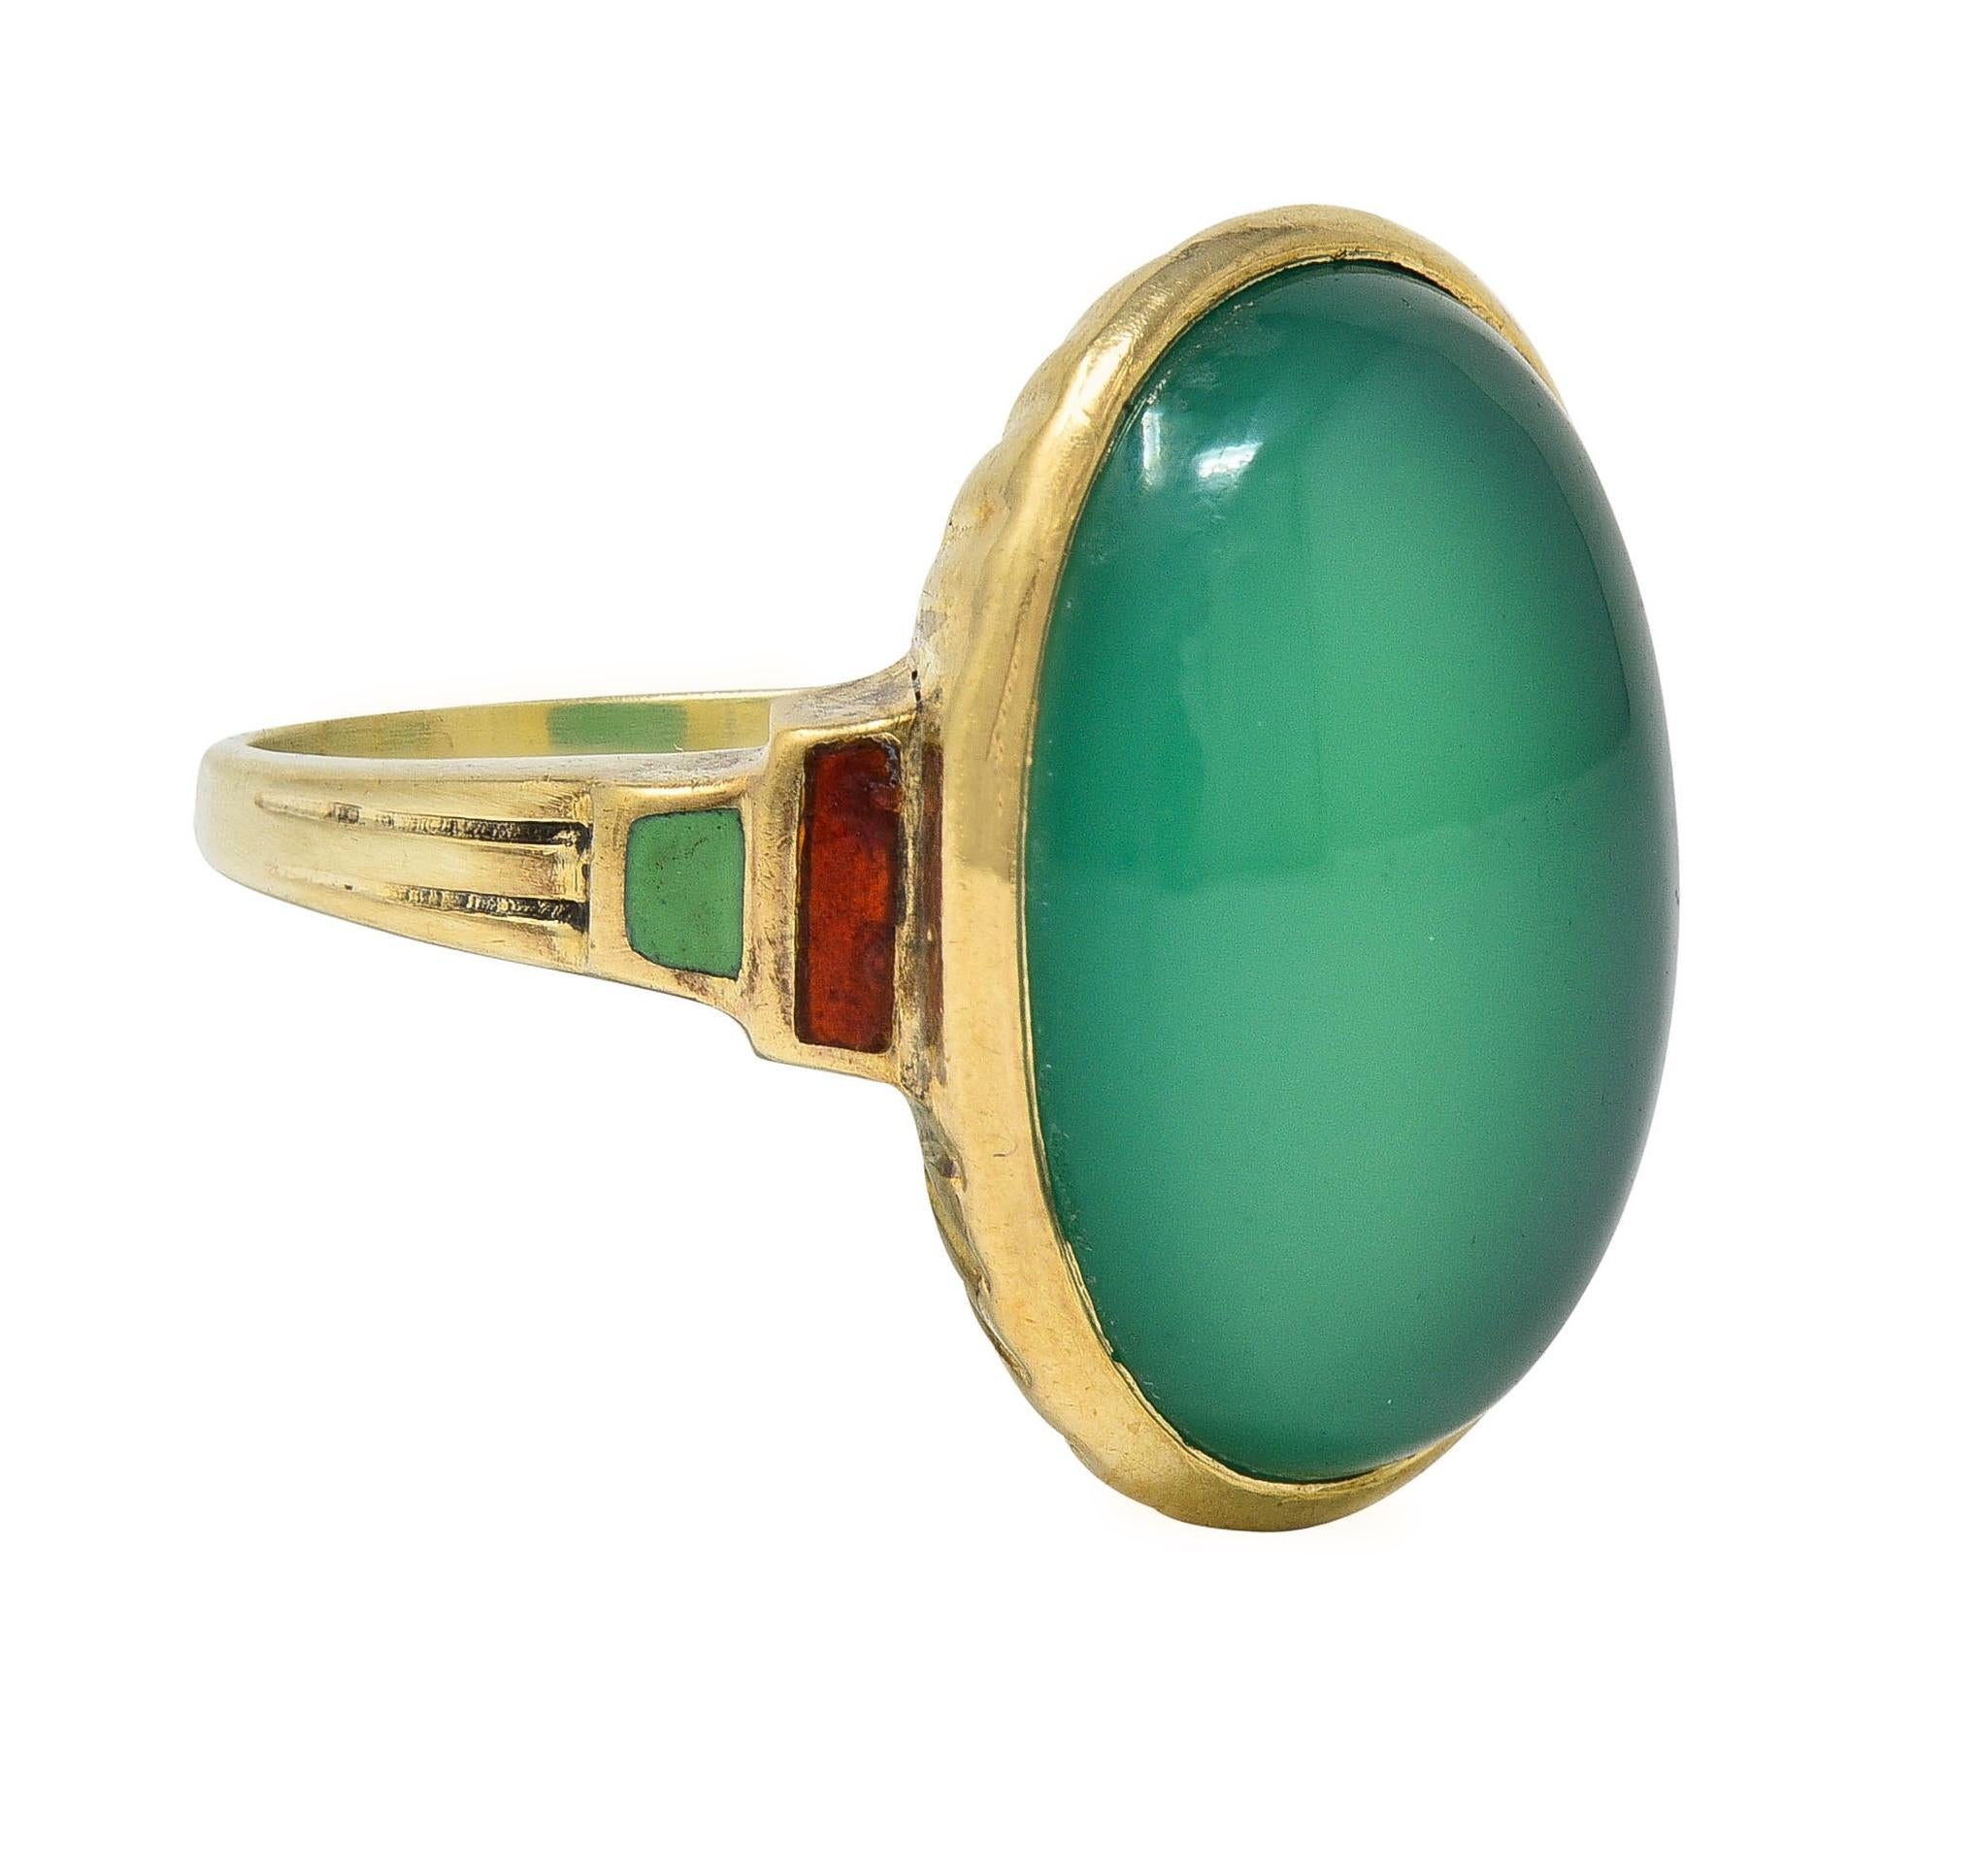 Centering an oval shape chrysoprase cabochon measuring 12.5 x 17.8 mm 
Translucent vibrant bluish-green in color with subtle chatoyancy
Bezel set with a fluted gallery and flanked by stepped shoulders
Inlaid with transparent orange and opaque light